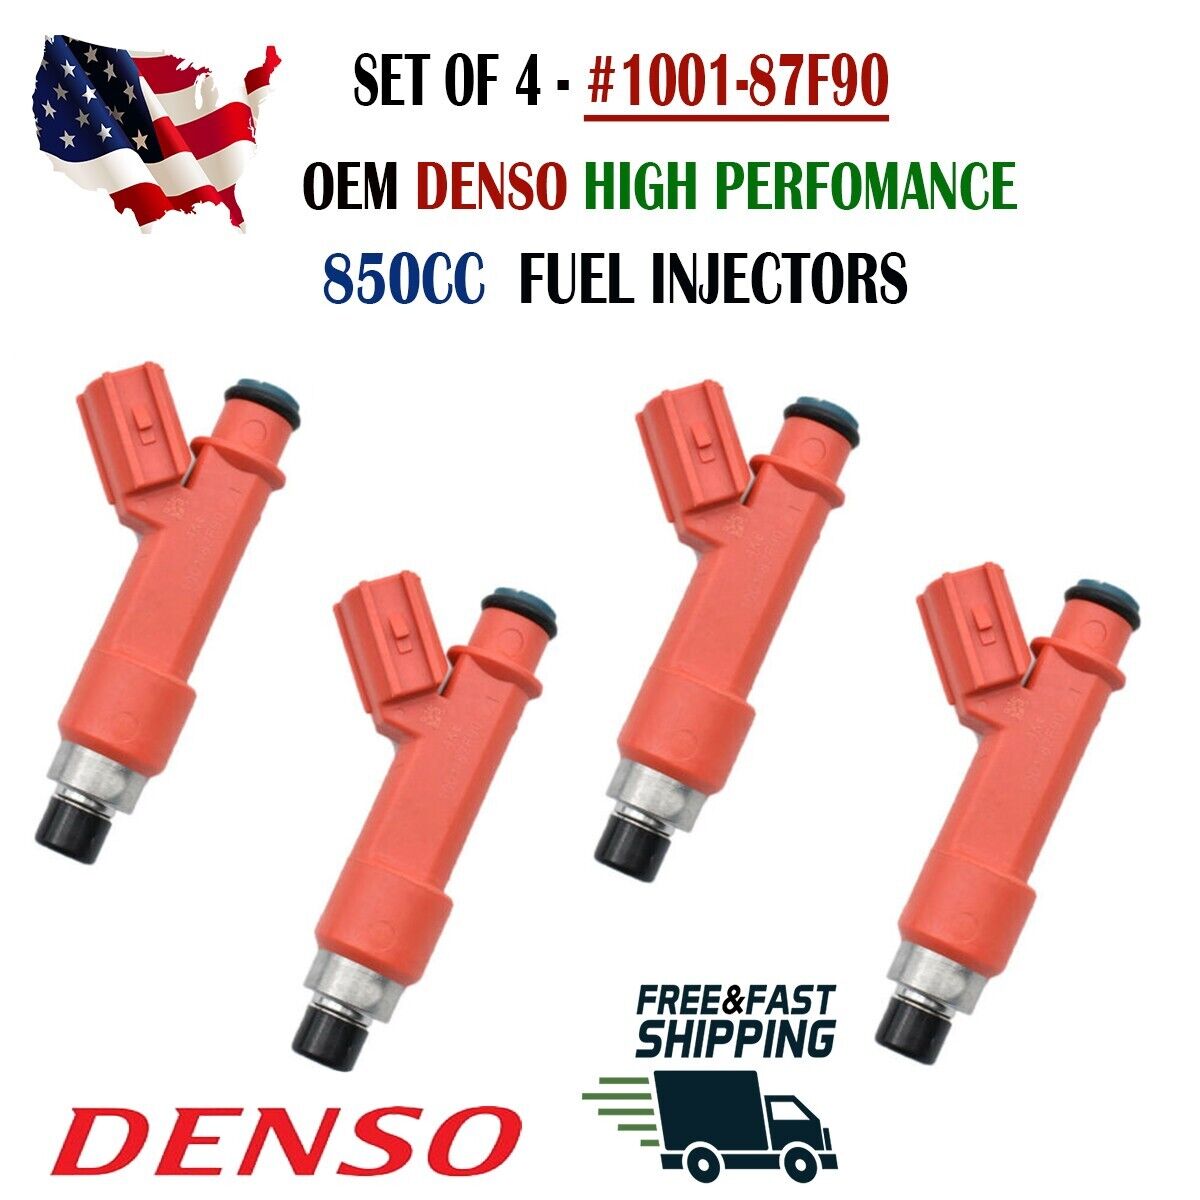 OEM Denso x4 HIGH PERFOMANCE FUEL INJECTORS for the 1ZZ and 2ZZ 850CC 1001-87F90